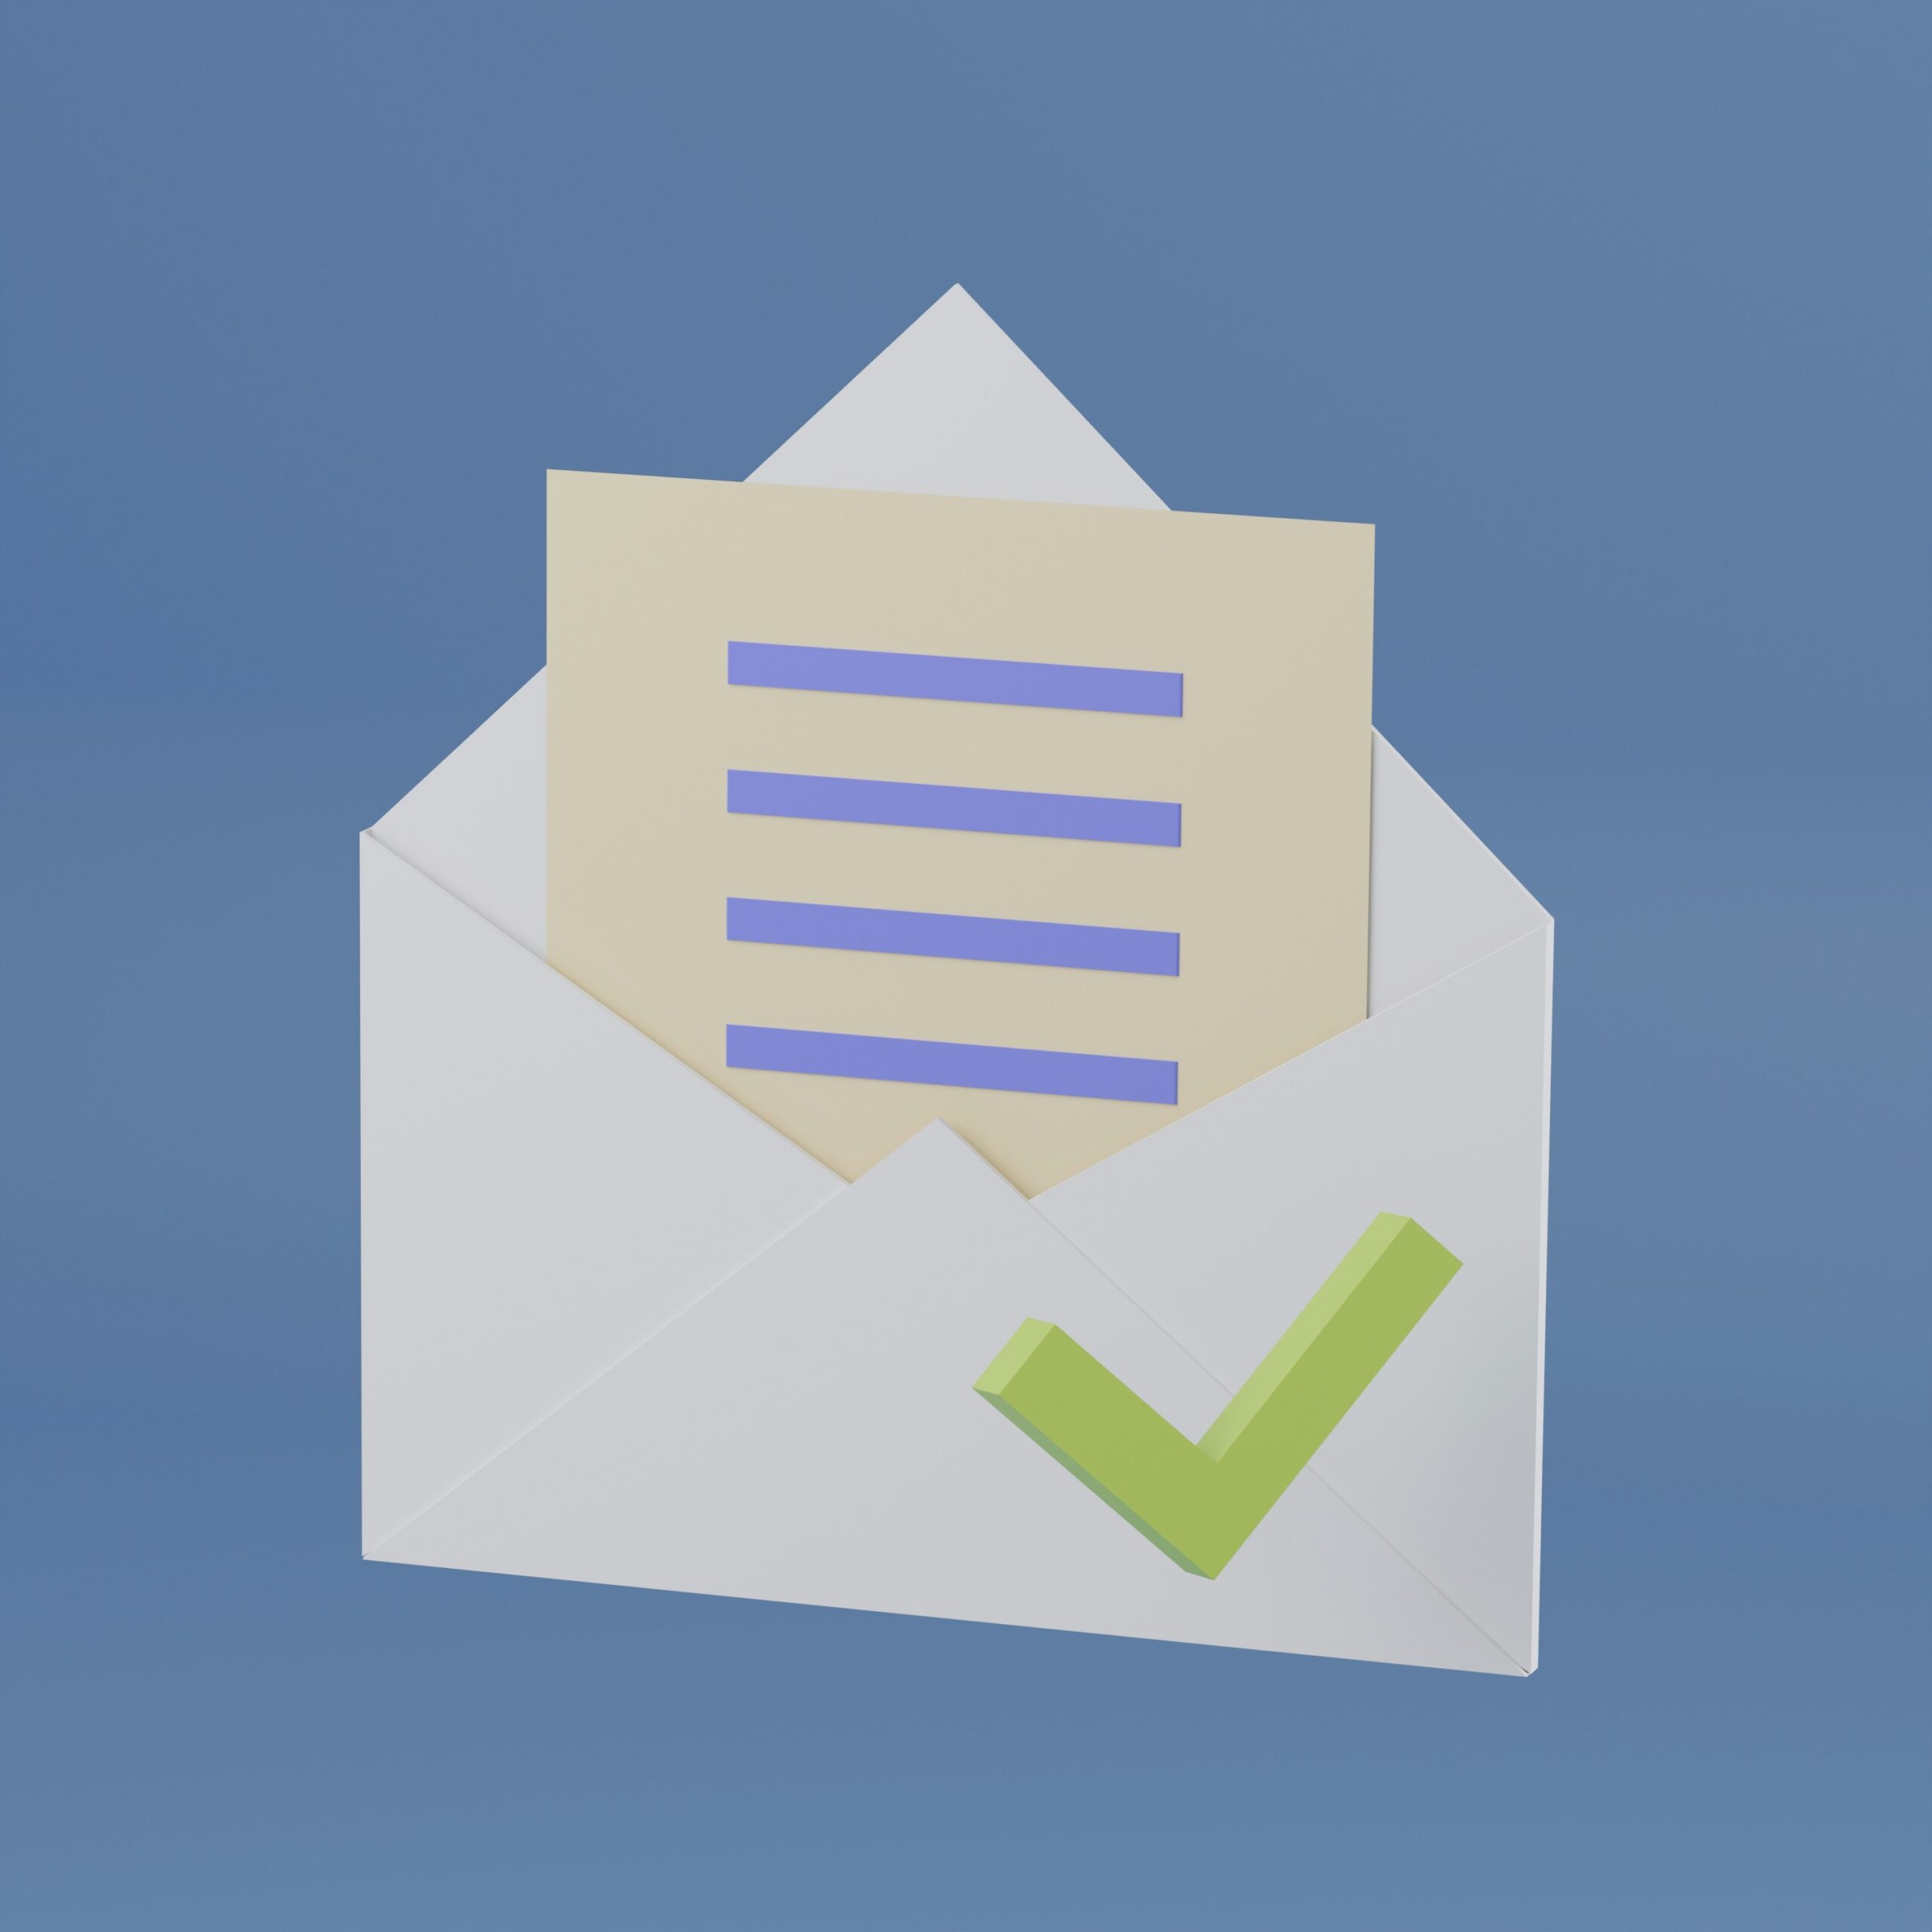 An envelope with a check mark on it, representing the successful completion of a SLAM method for cybersecurity.